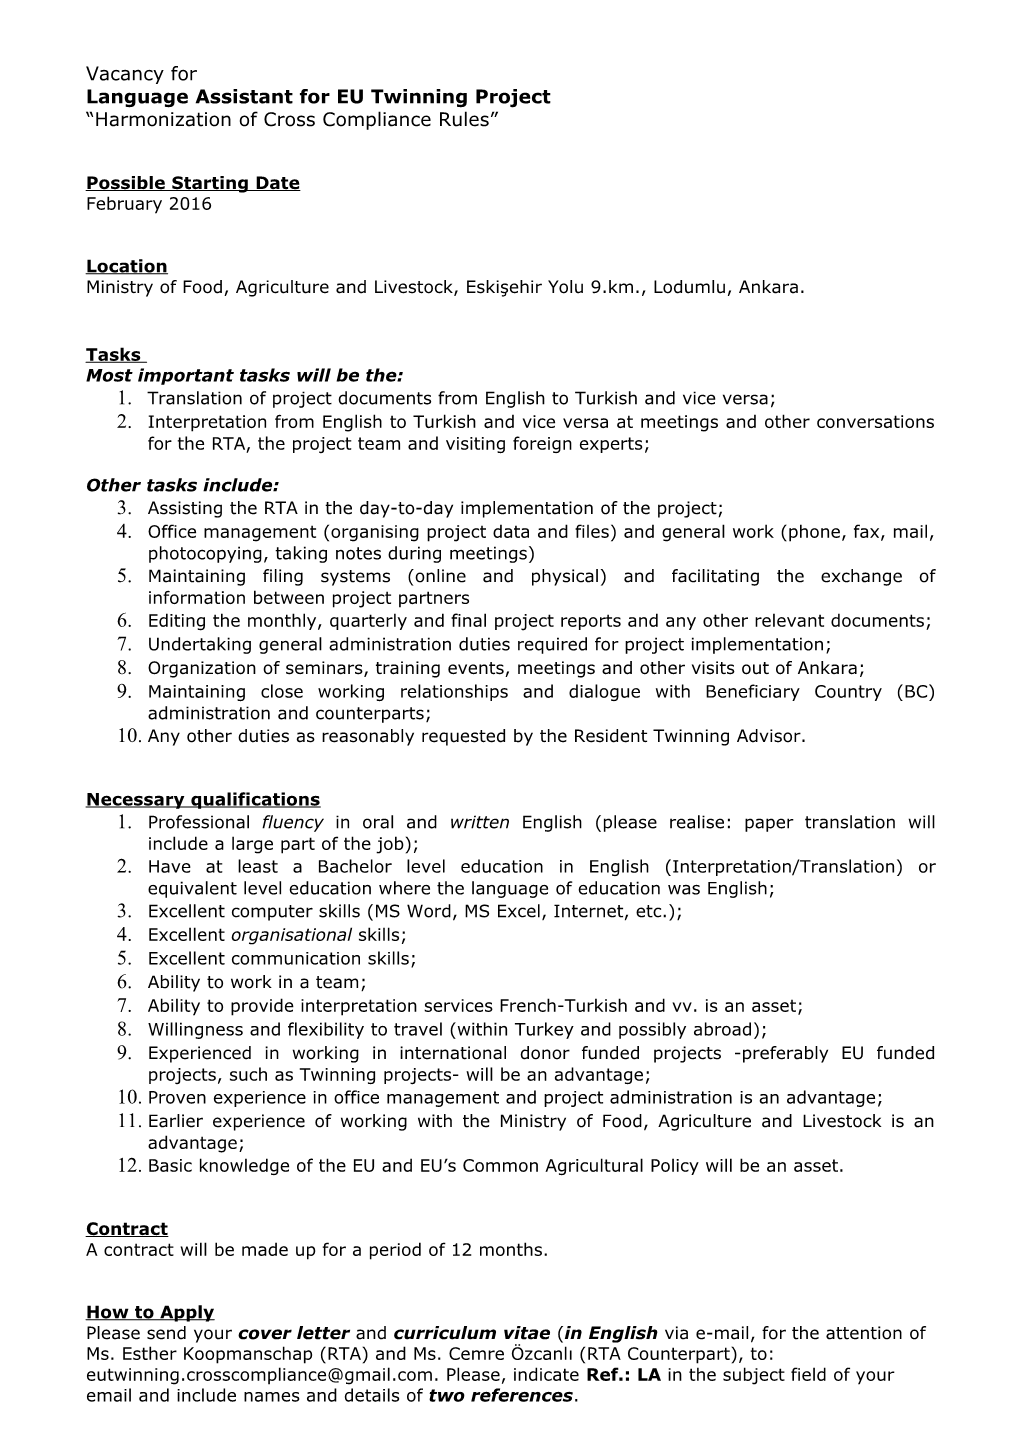 Employment/Vacant Position